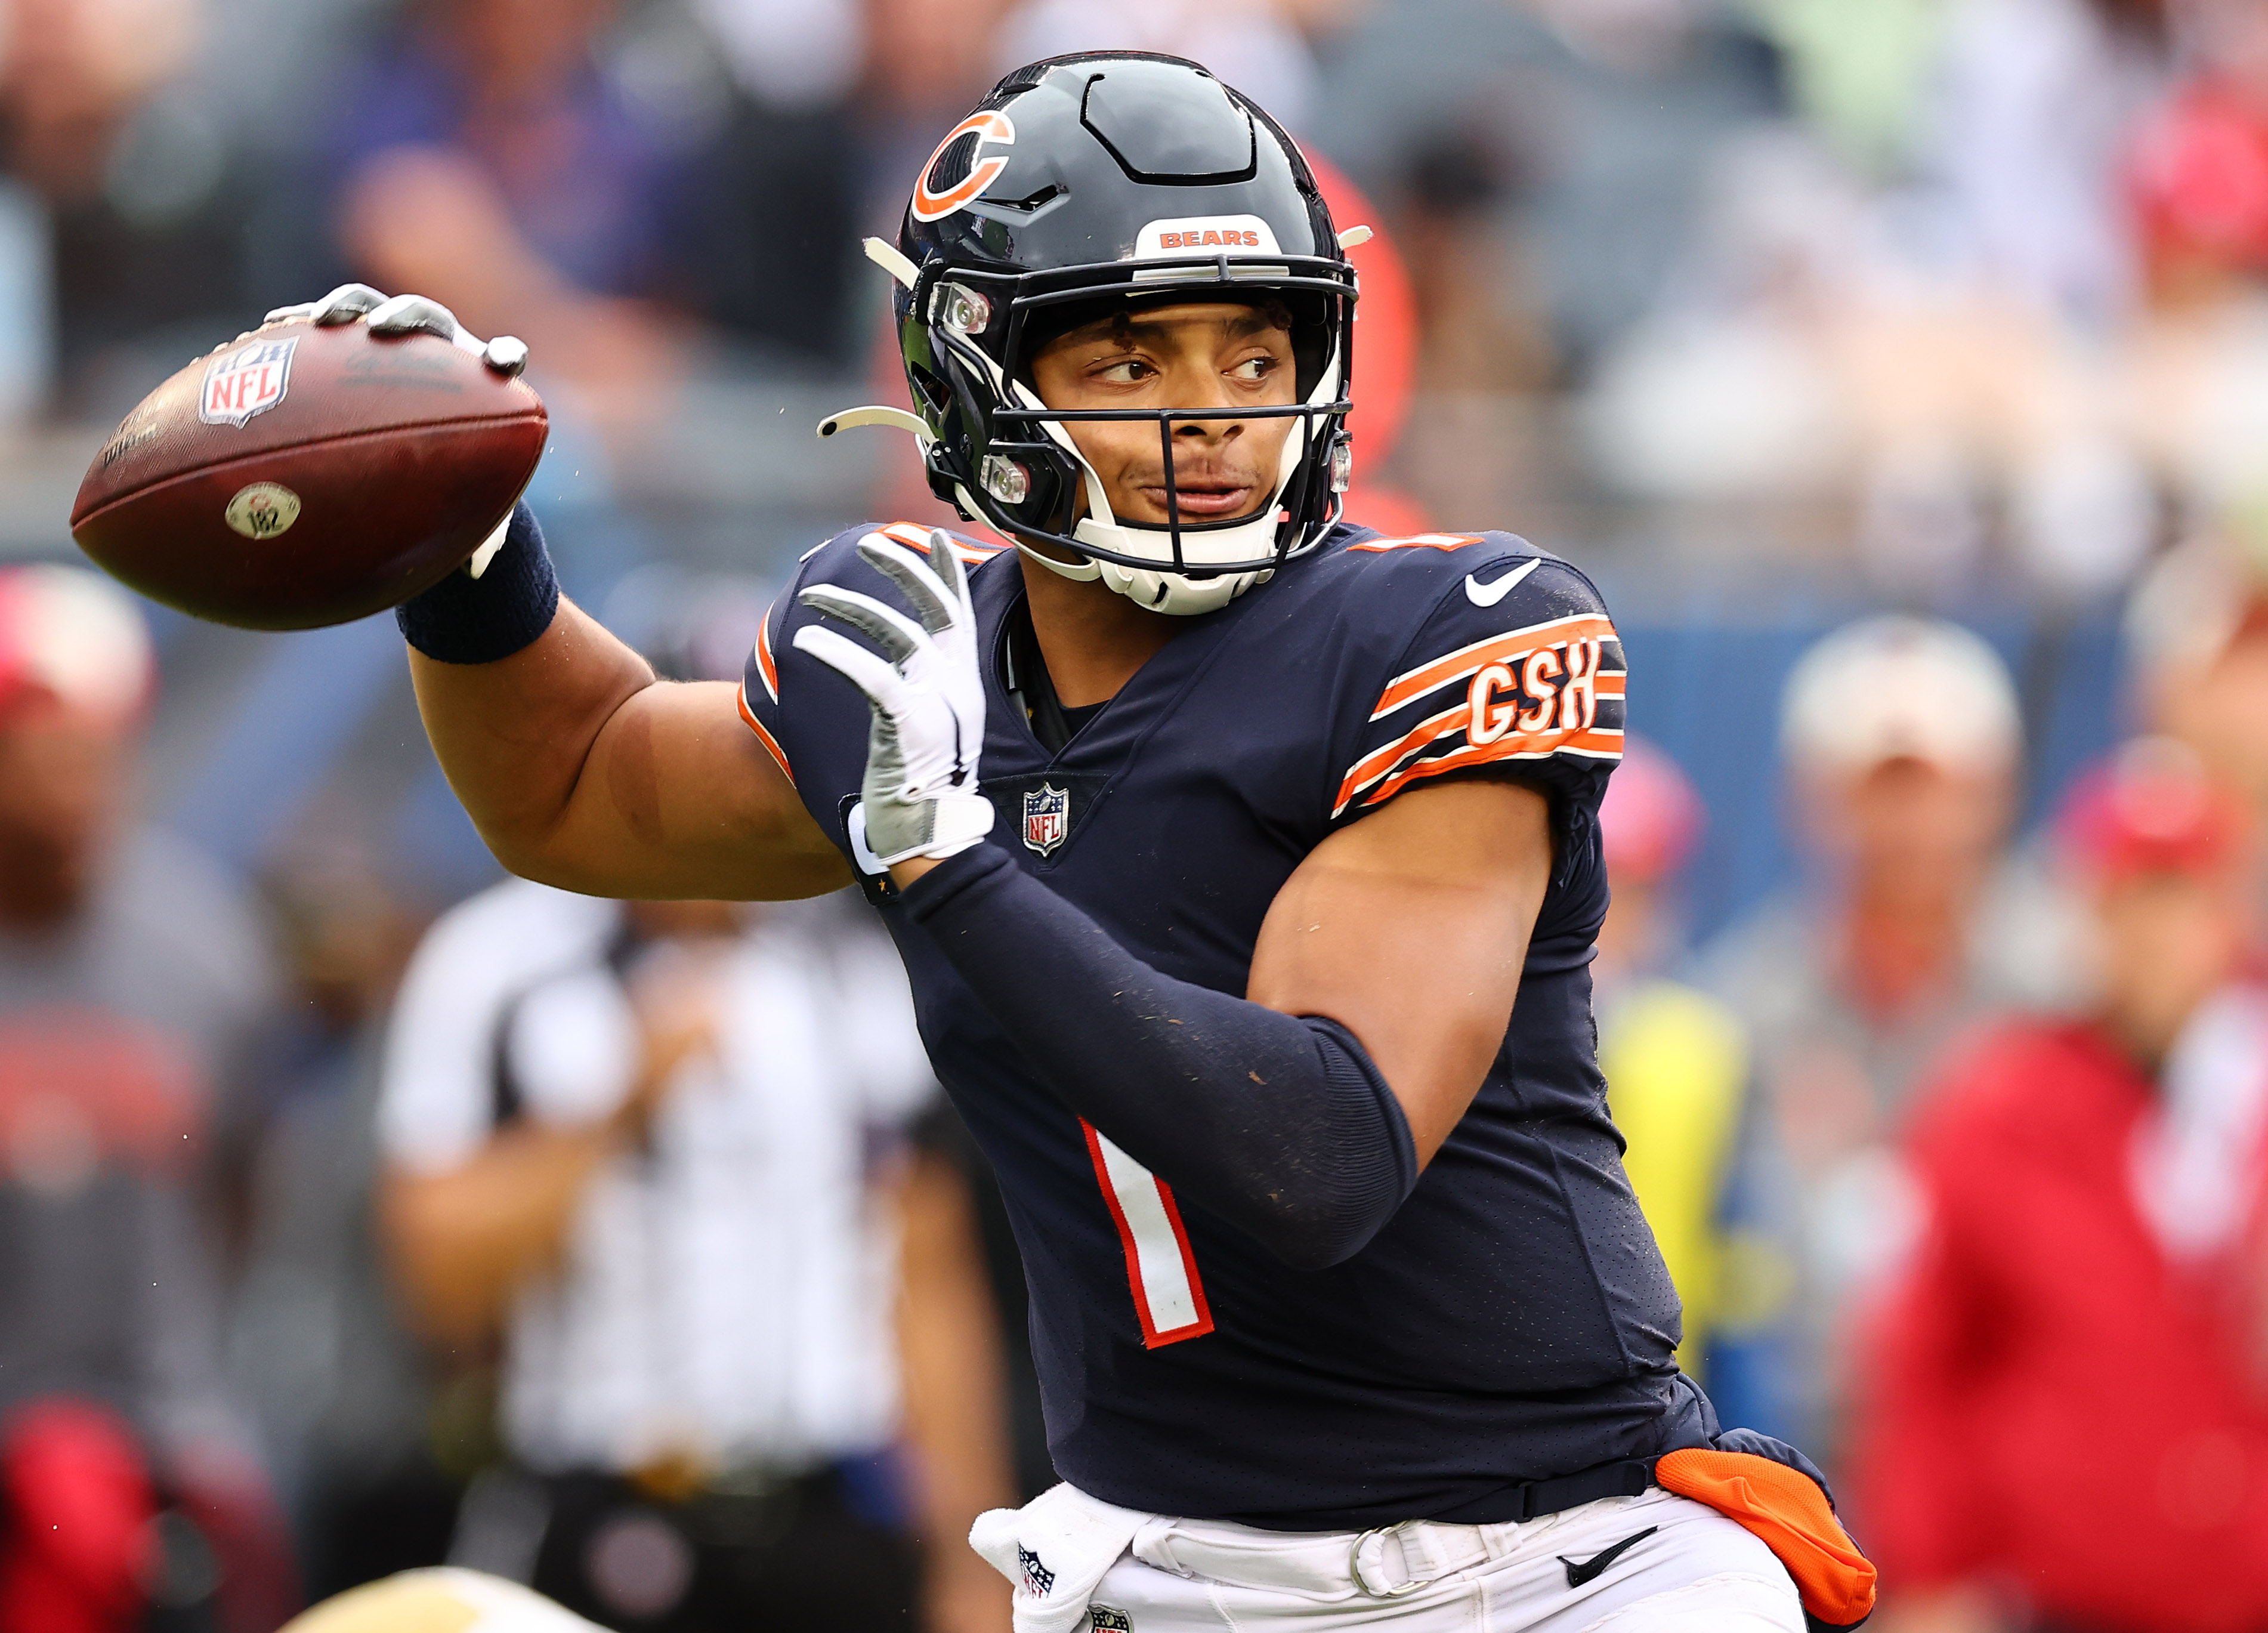 Causes for concern as Bears face the Packers in Week